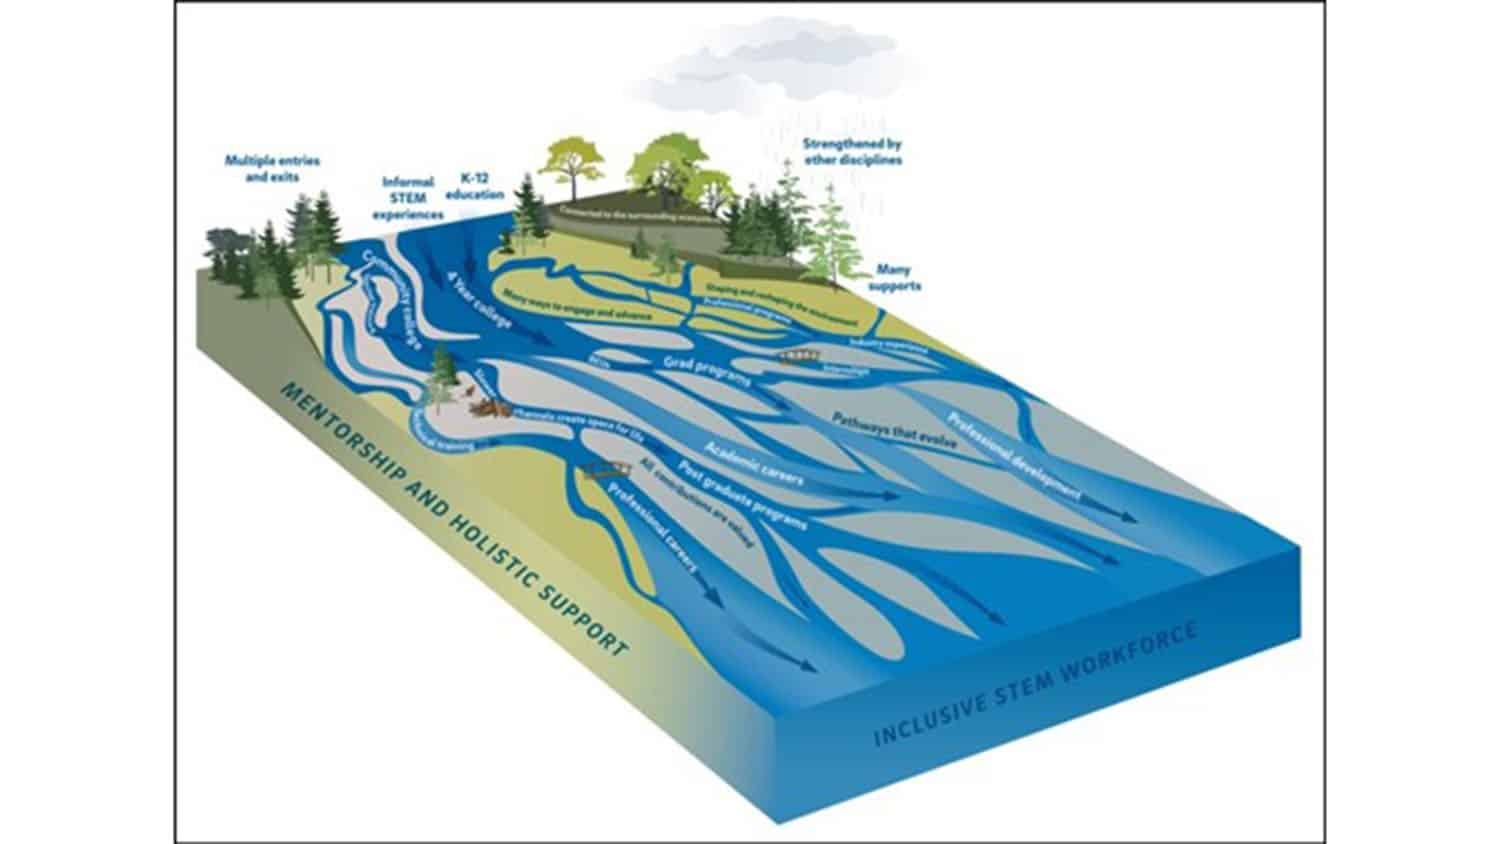 image imagines STEM career pathways as a braided river with many ways of achieving a career in STEMM